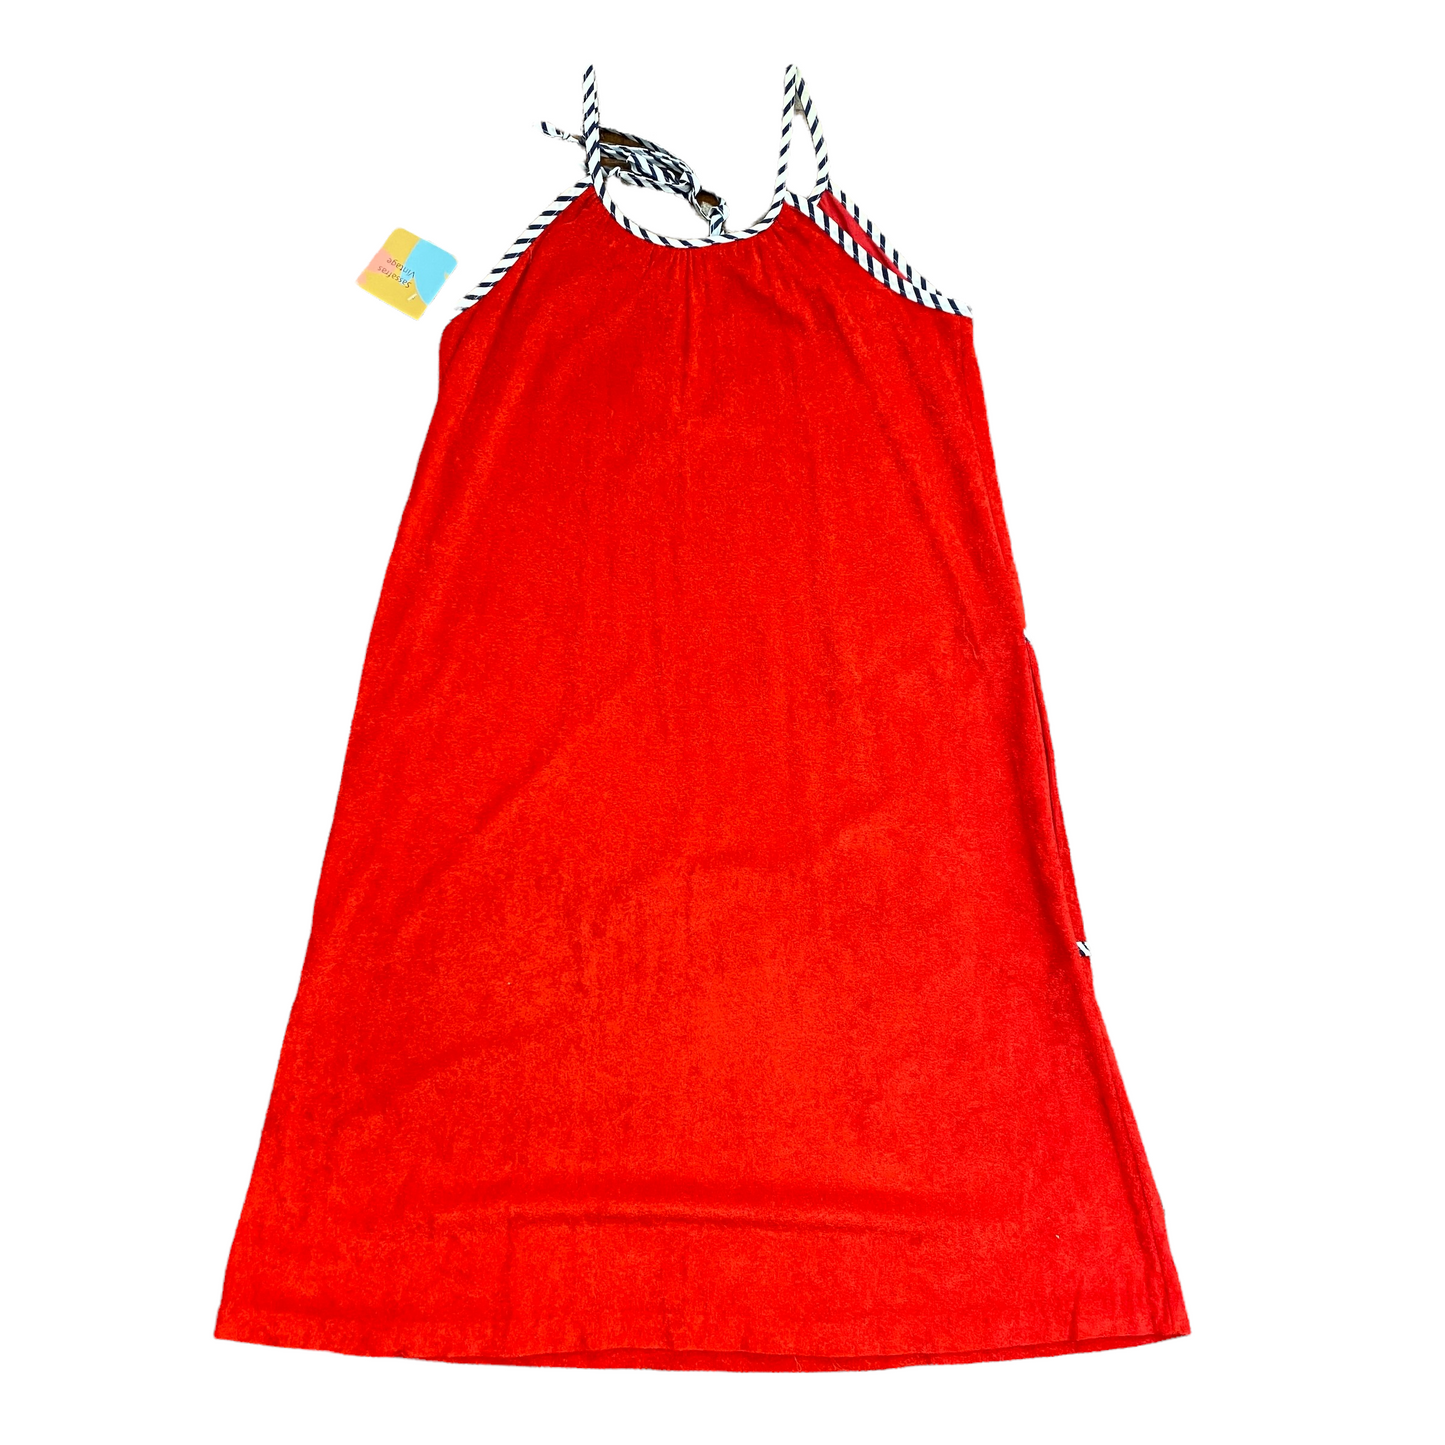 60s Red Terry Cloth Beach Dress - Size Small